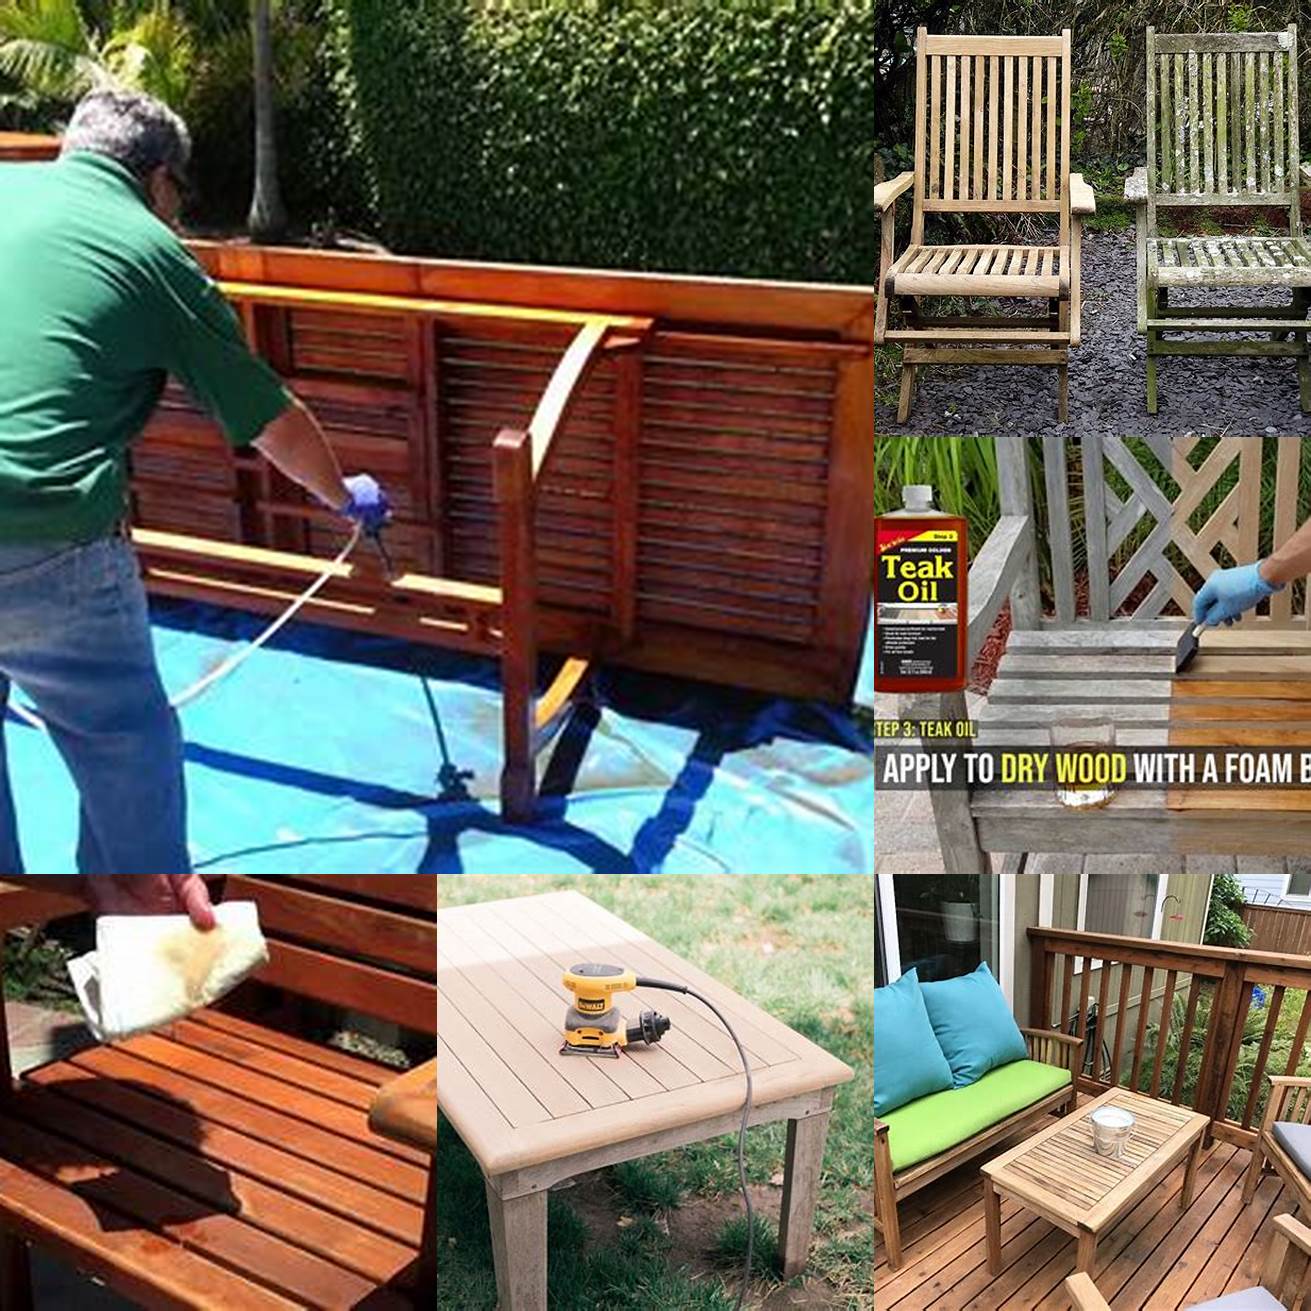 A picture of someone polishing teak outdoor furniture